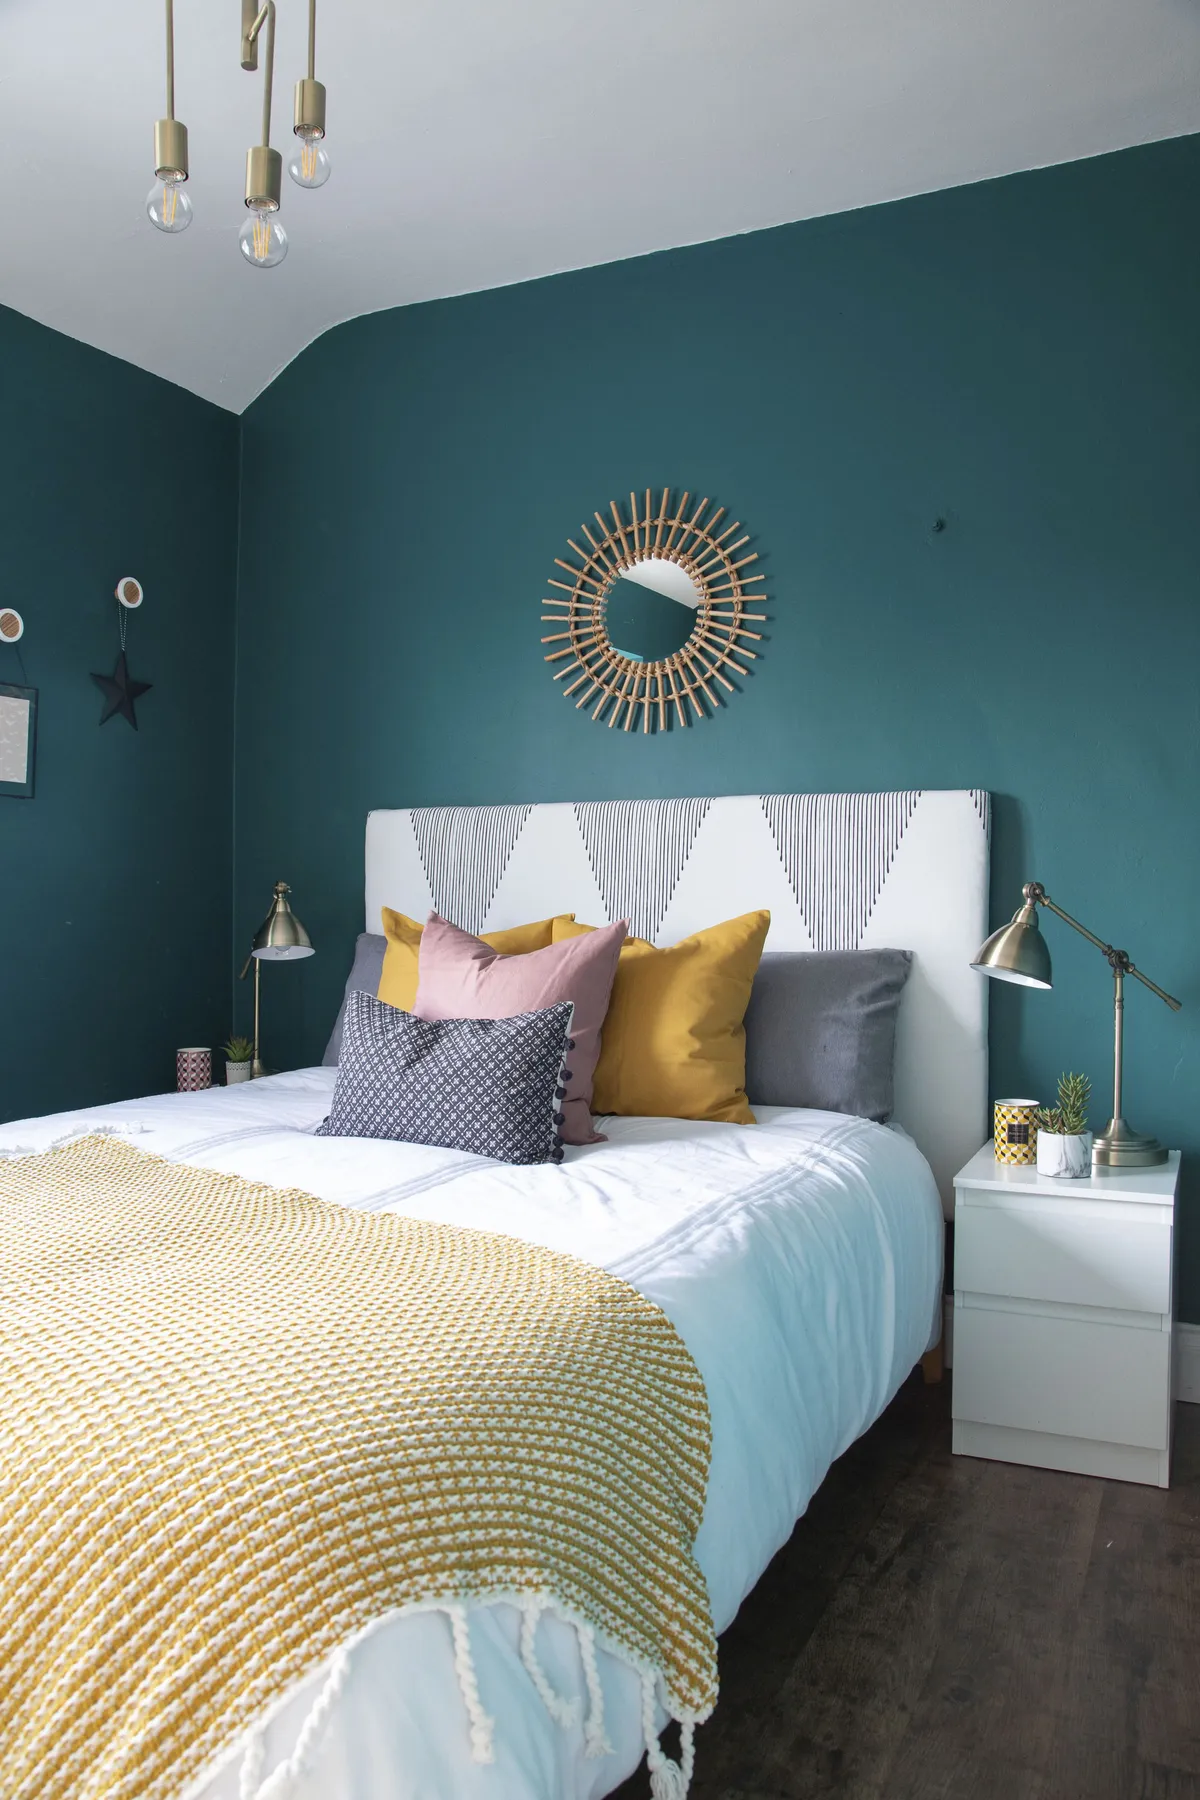 ‘At first, we painted the guest bedroom white and just left it,’ Ruth says. ‘In September 2018 I had a double lung transplant. By December, I felt much stronger and wanted to celebrate by painting the spare room, so in three days over the Christmas period David and I totally transformed it. I chose a punchy hue – Valspar’s Winter Spruce – to reflect our joy at my new-found life and energy’